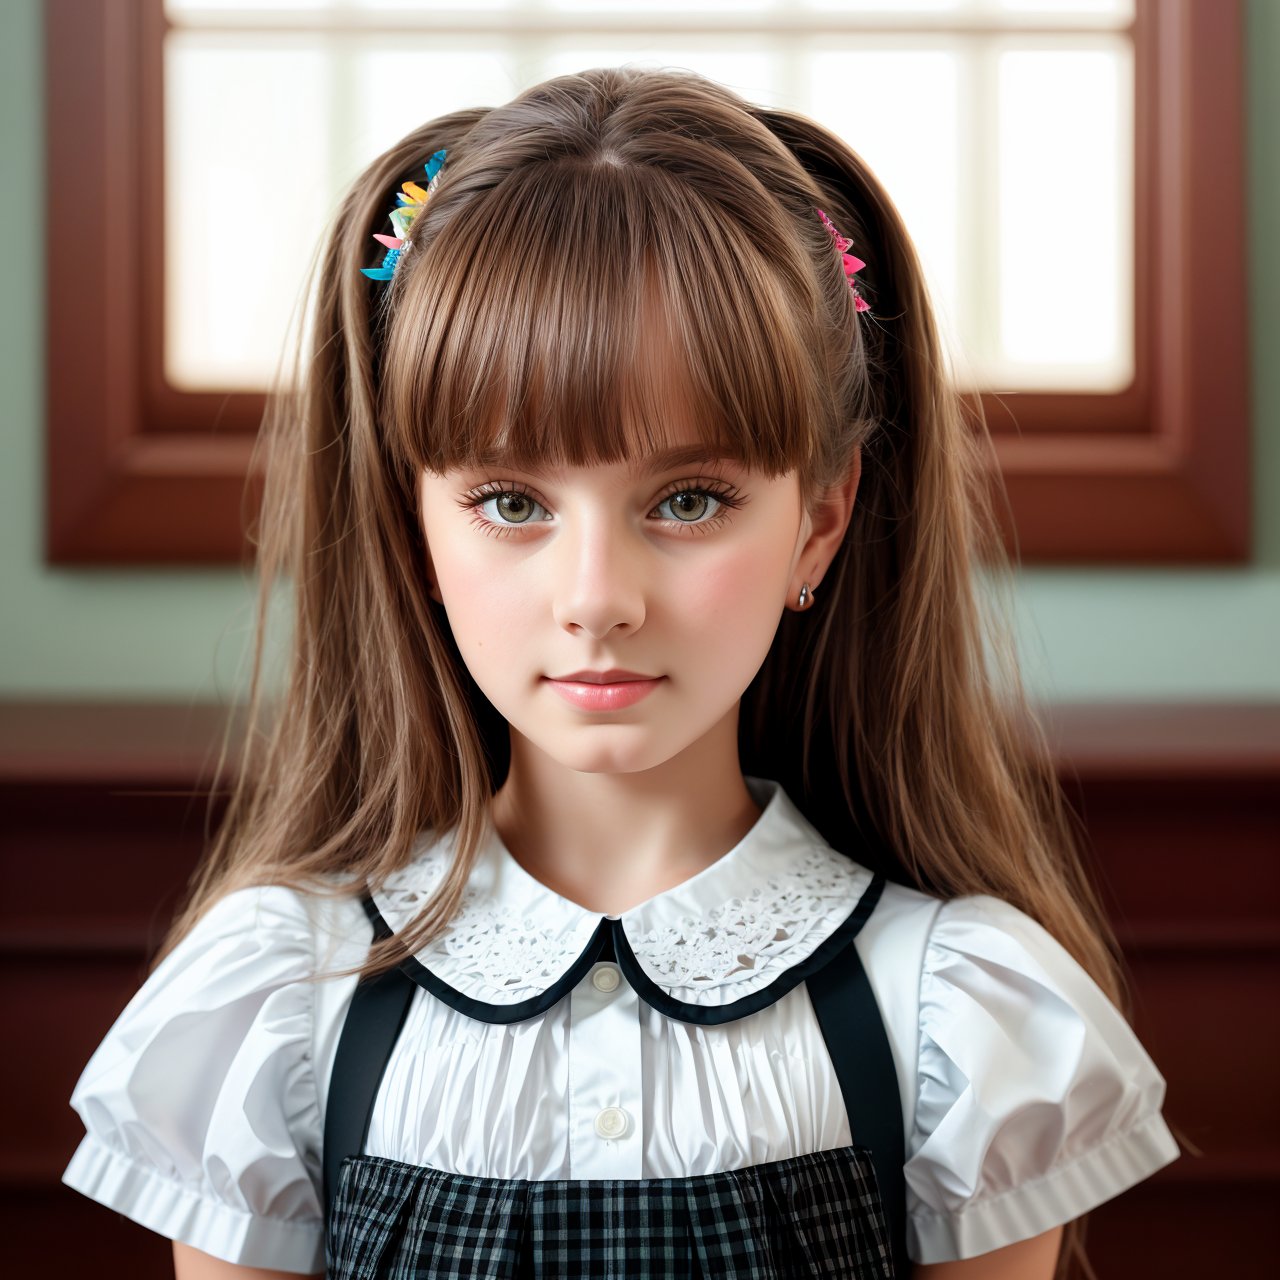 (masterpiece:1.3), best quality, extra resolution, looking at viewer, full body portrait of calm (AIDA_LoRA_KtM:1.1) <lora:AIDA_LoRA_KtM:0.98> in a schoolgirl outfit indoors, little girl, pretty face, self-assurance, dramatic, insane level of details, intricate pattern, studio photo, studio photo, kkw-ph1, hdr, f1.5, (colorful:1.1)